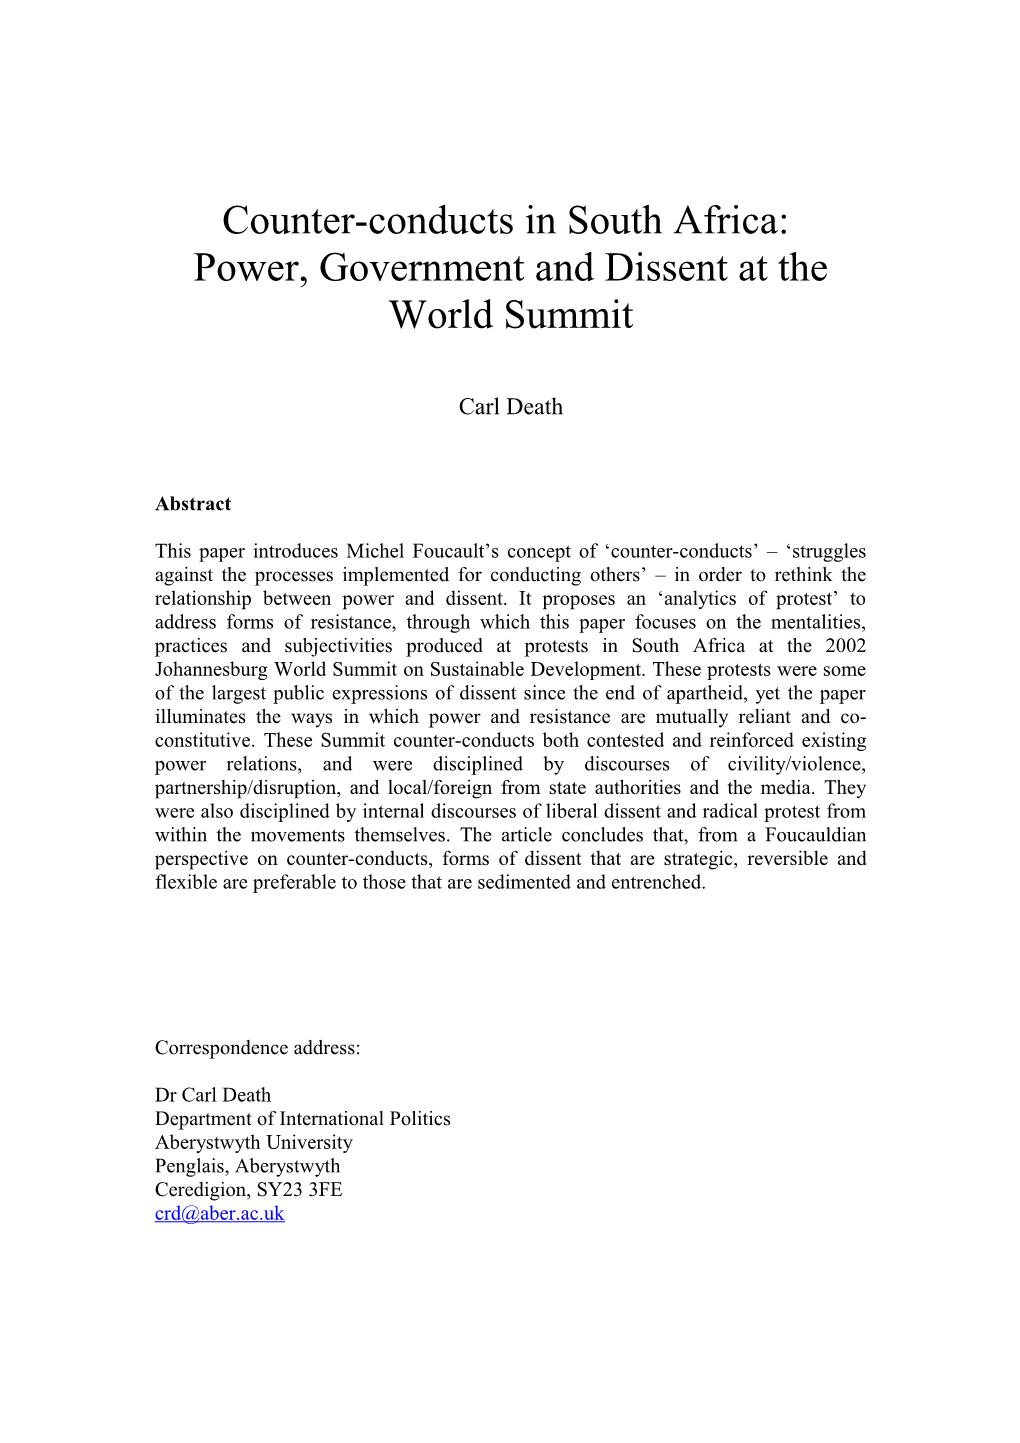 Power, Government and Dissent at the World Summit